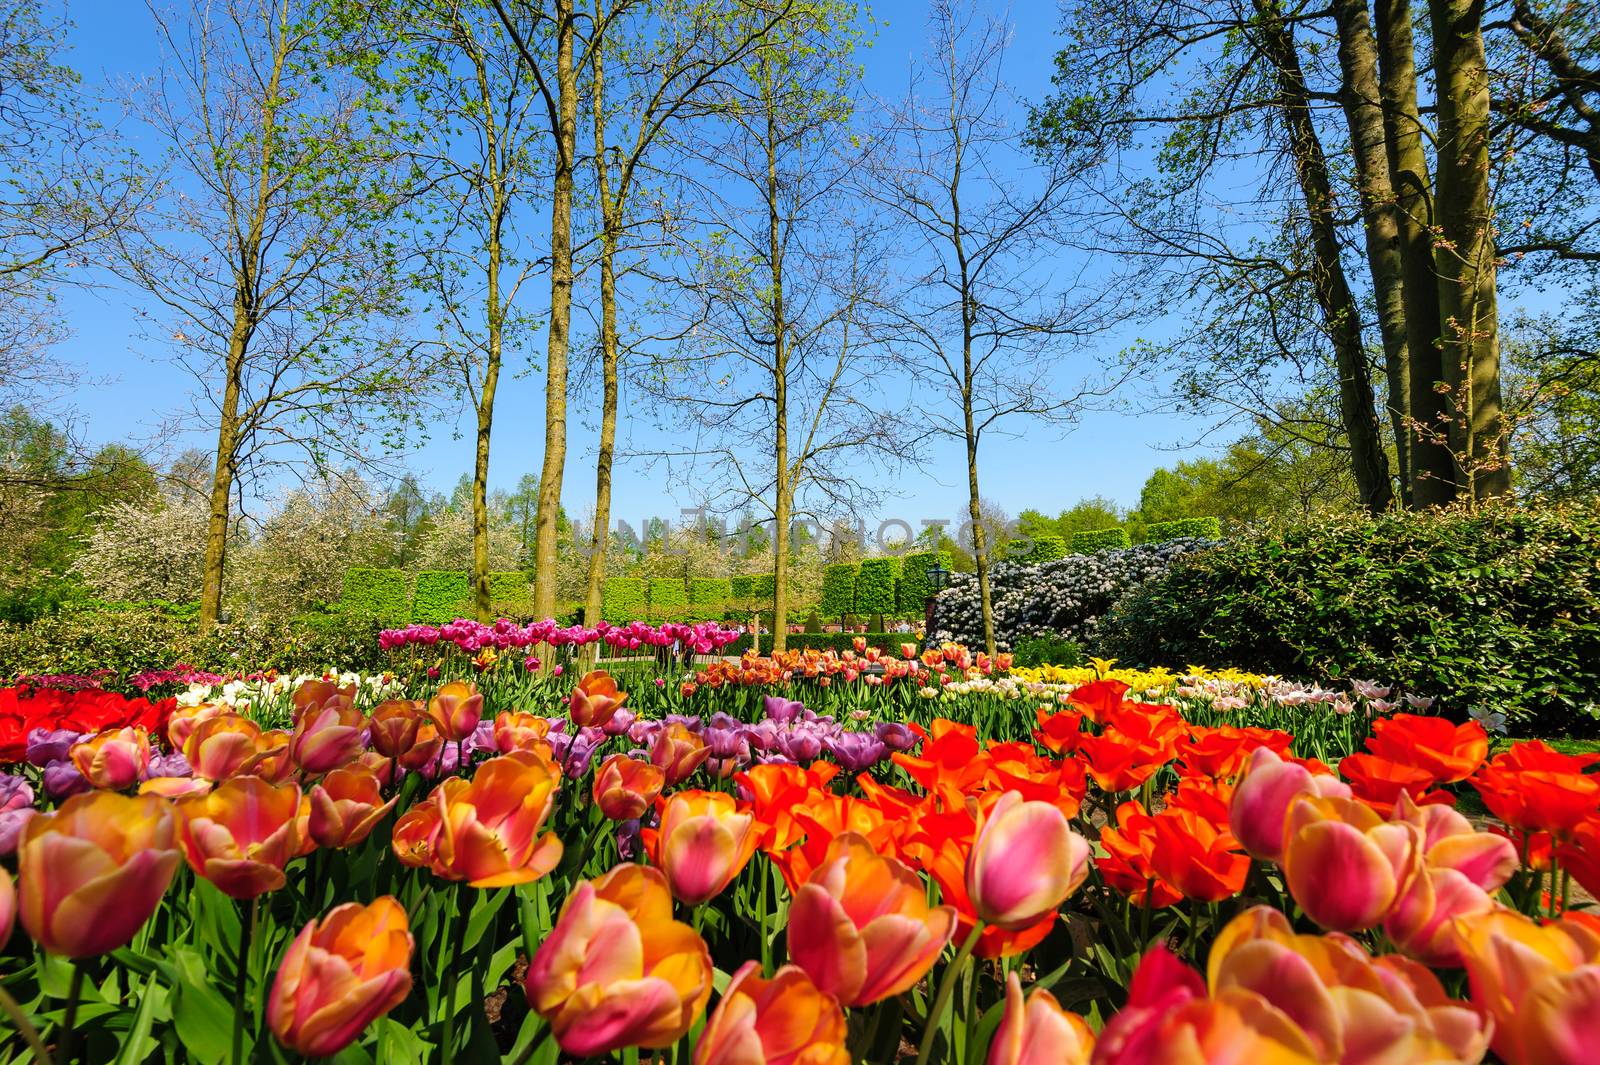 Luxury flower beds of of the Keukenhof, the world's largest flower and tulip garden park in South Holland. One of the most popular destinations in the Netherlands, also known as the Garden of Europe, approximately 7 million flower bulbs are planted annually in the park, which covers an area of 32 hectares (79 acres) and is open for two months.